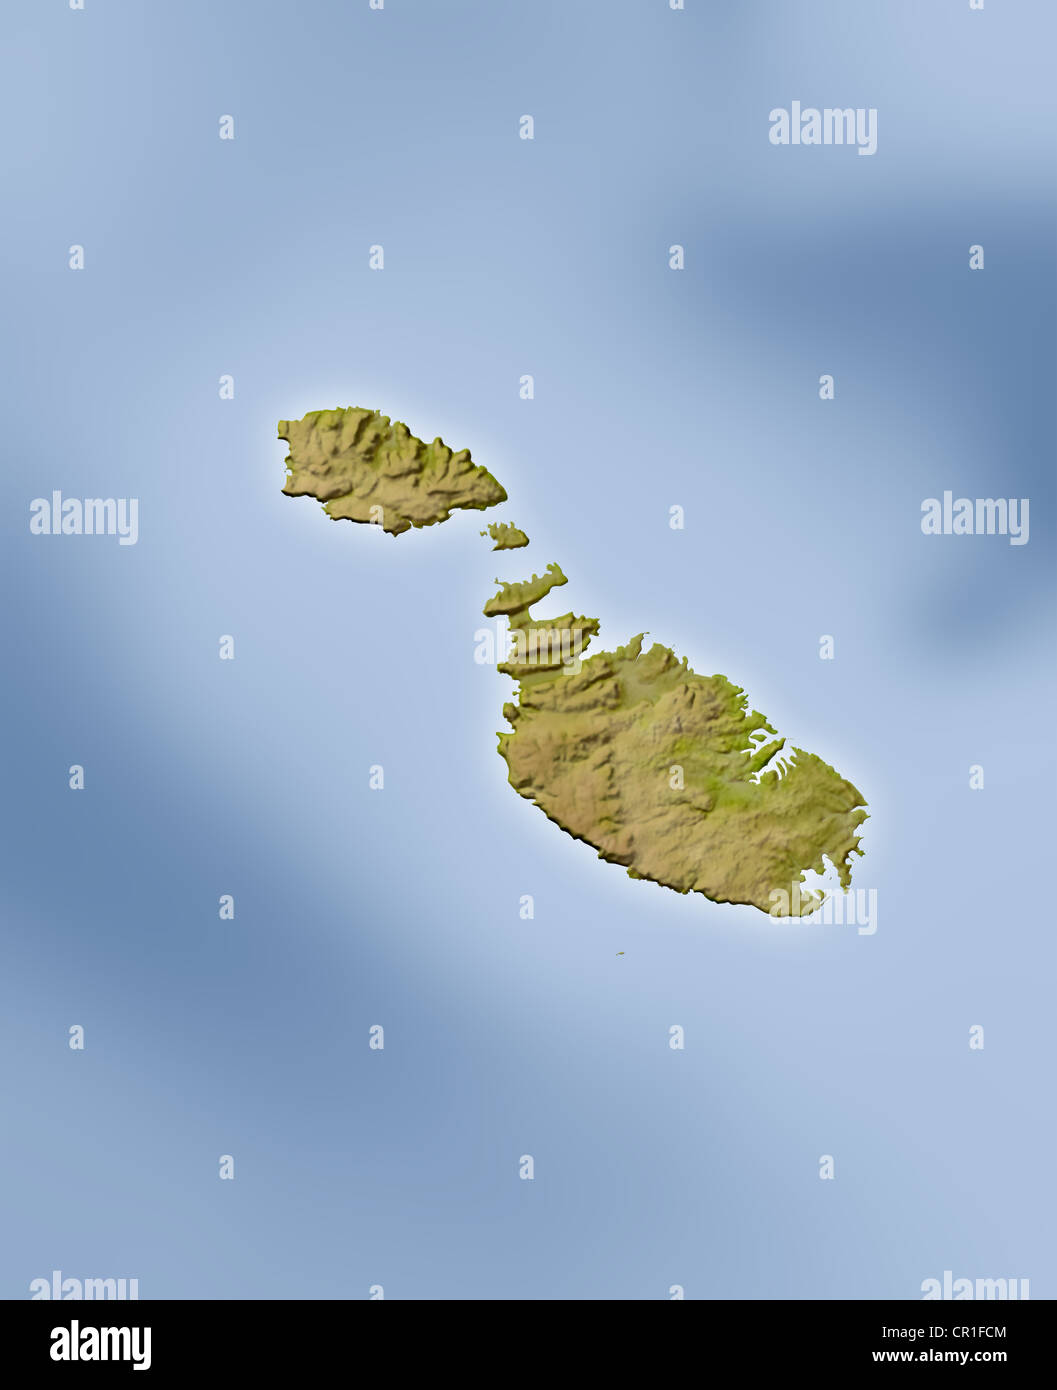 Malta, shaded relief map. Stock Photo